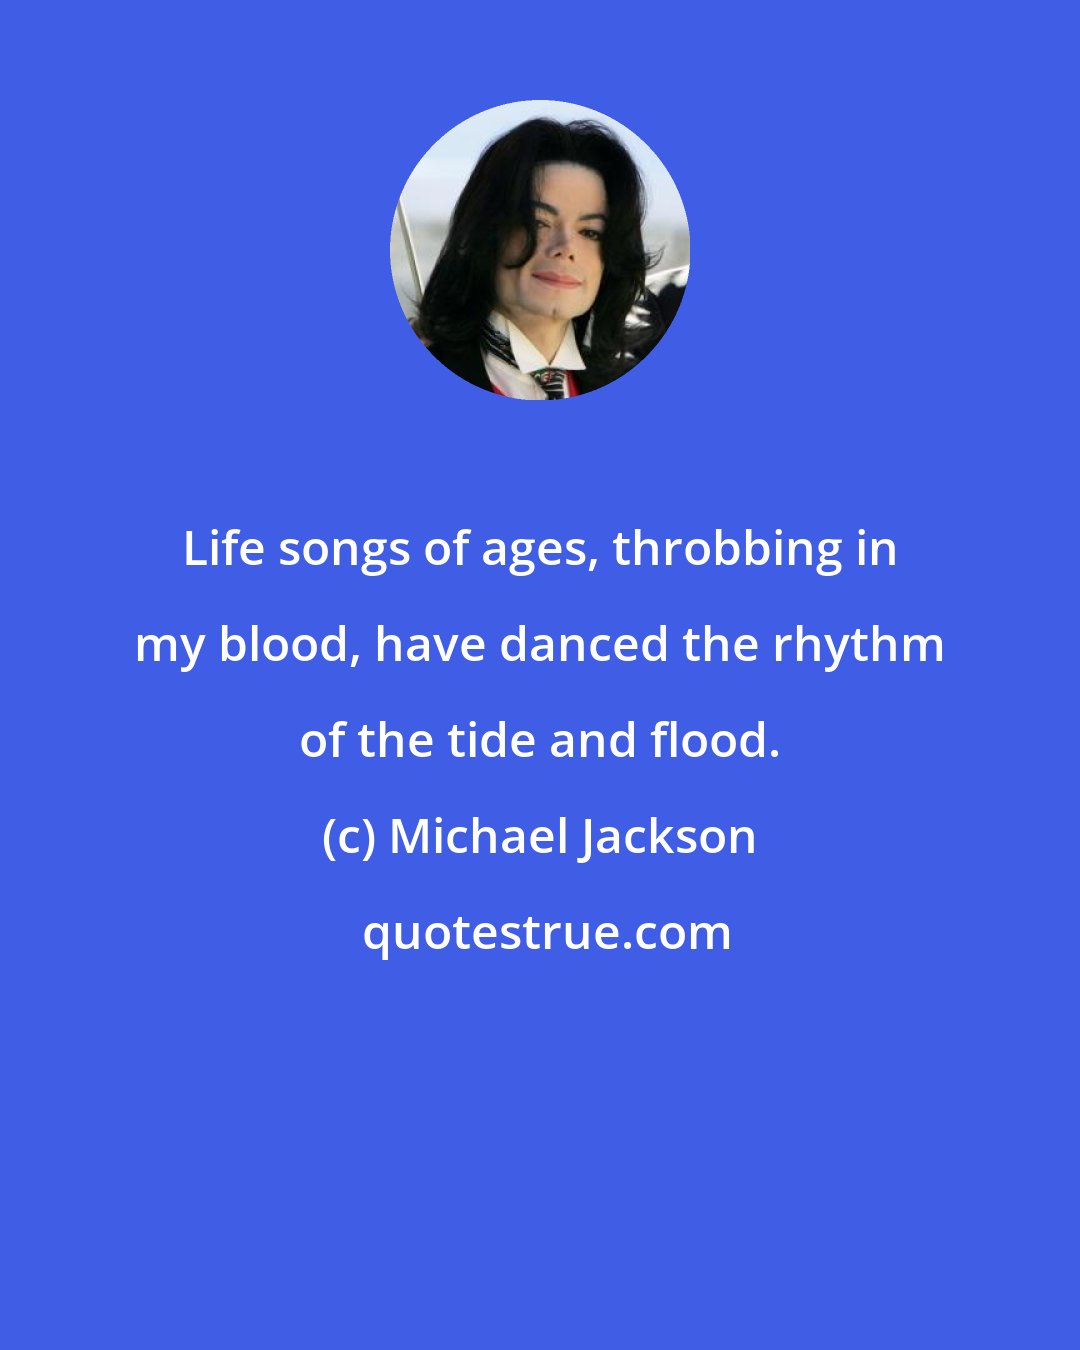 Michael Jackson: Life songs of ages, throbbing in my blood, have danced the rhythm of the tide and flood.